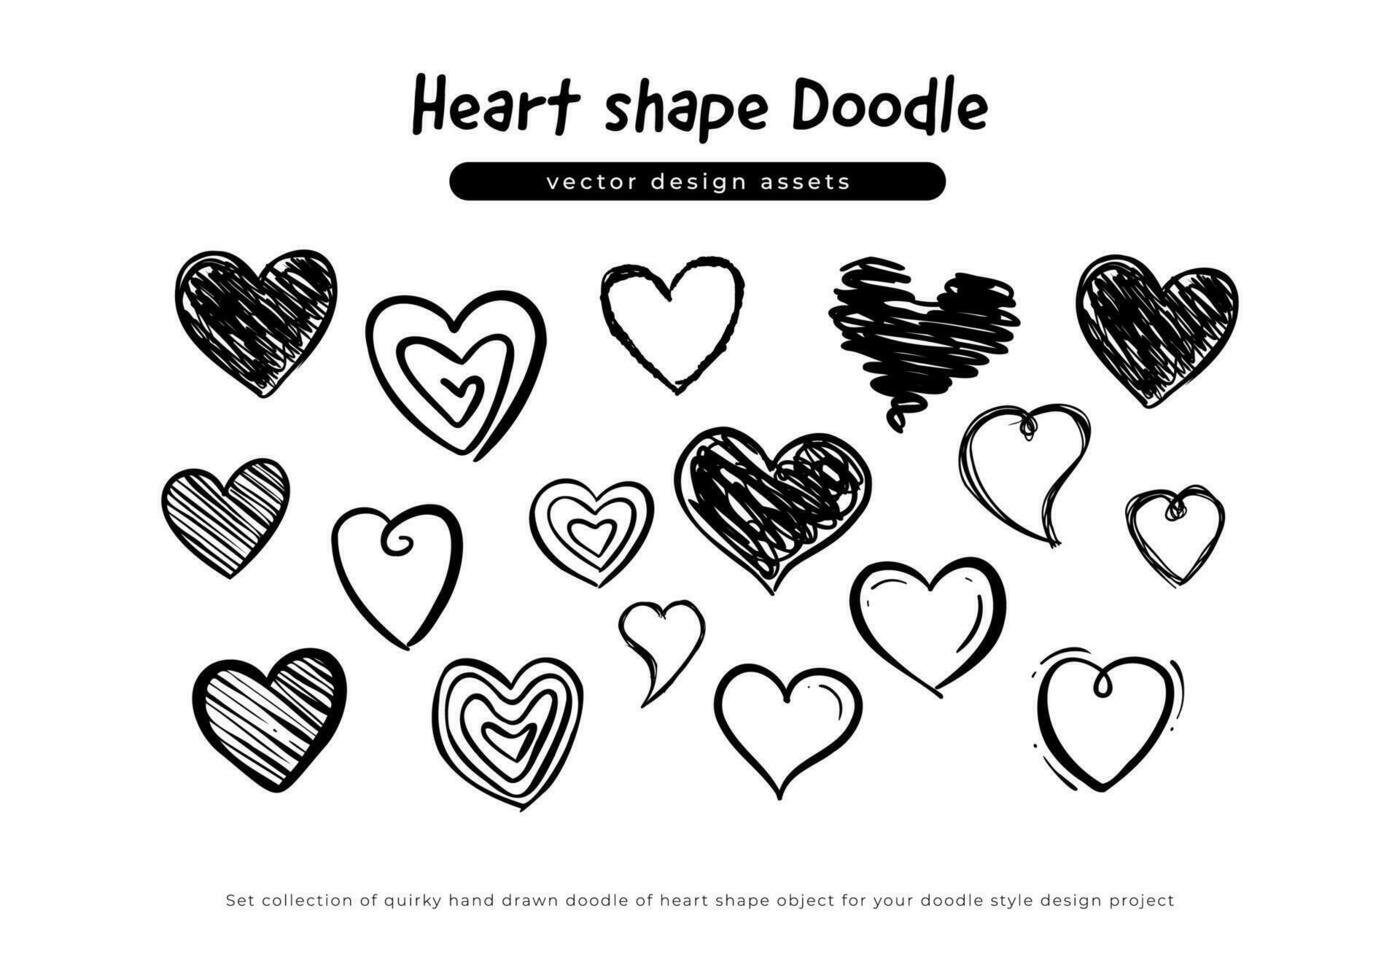 Set collection of quirky hand drawn doodle of heart shape object for your doodle style design project. Vector love shape hand drawn object